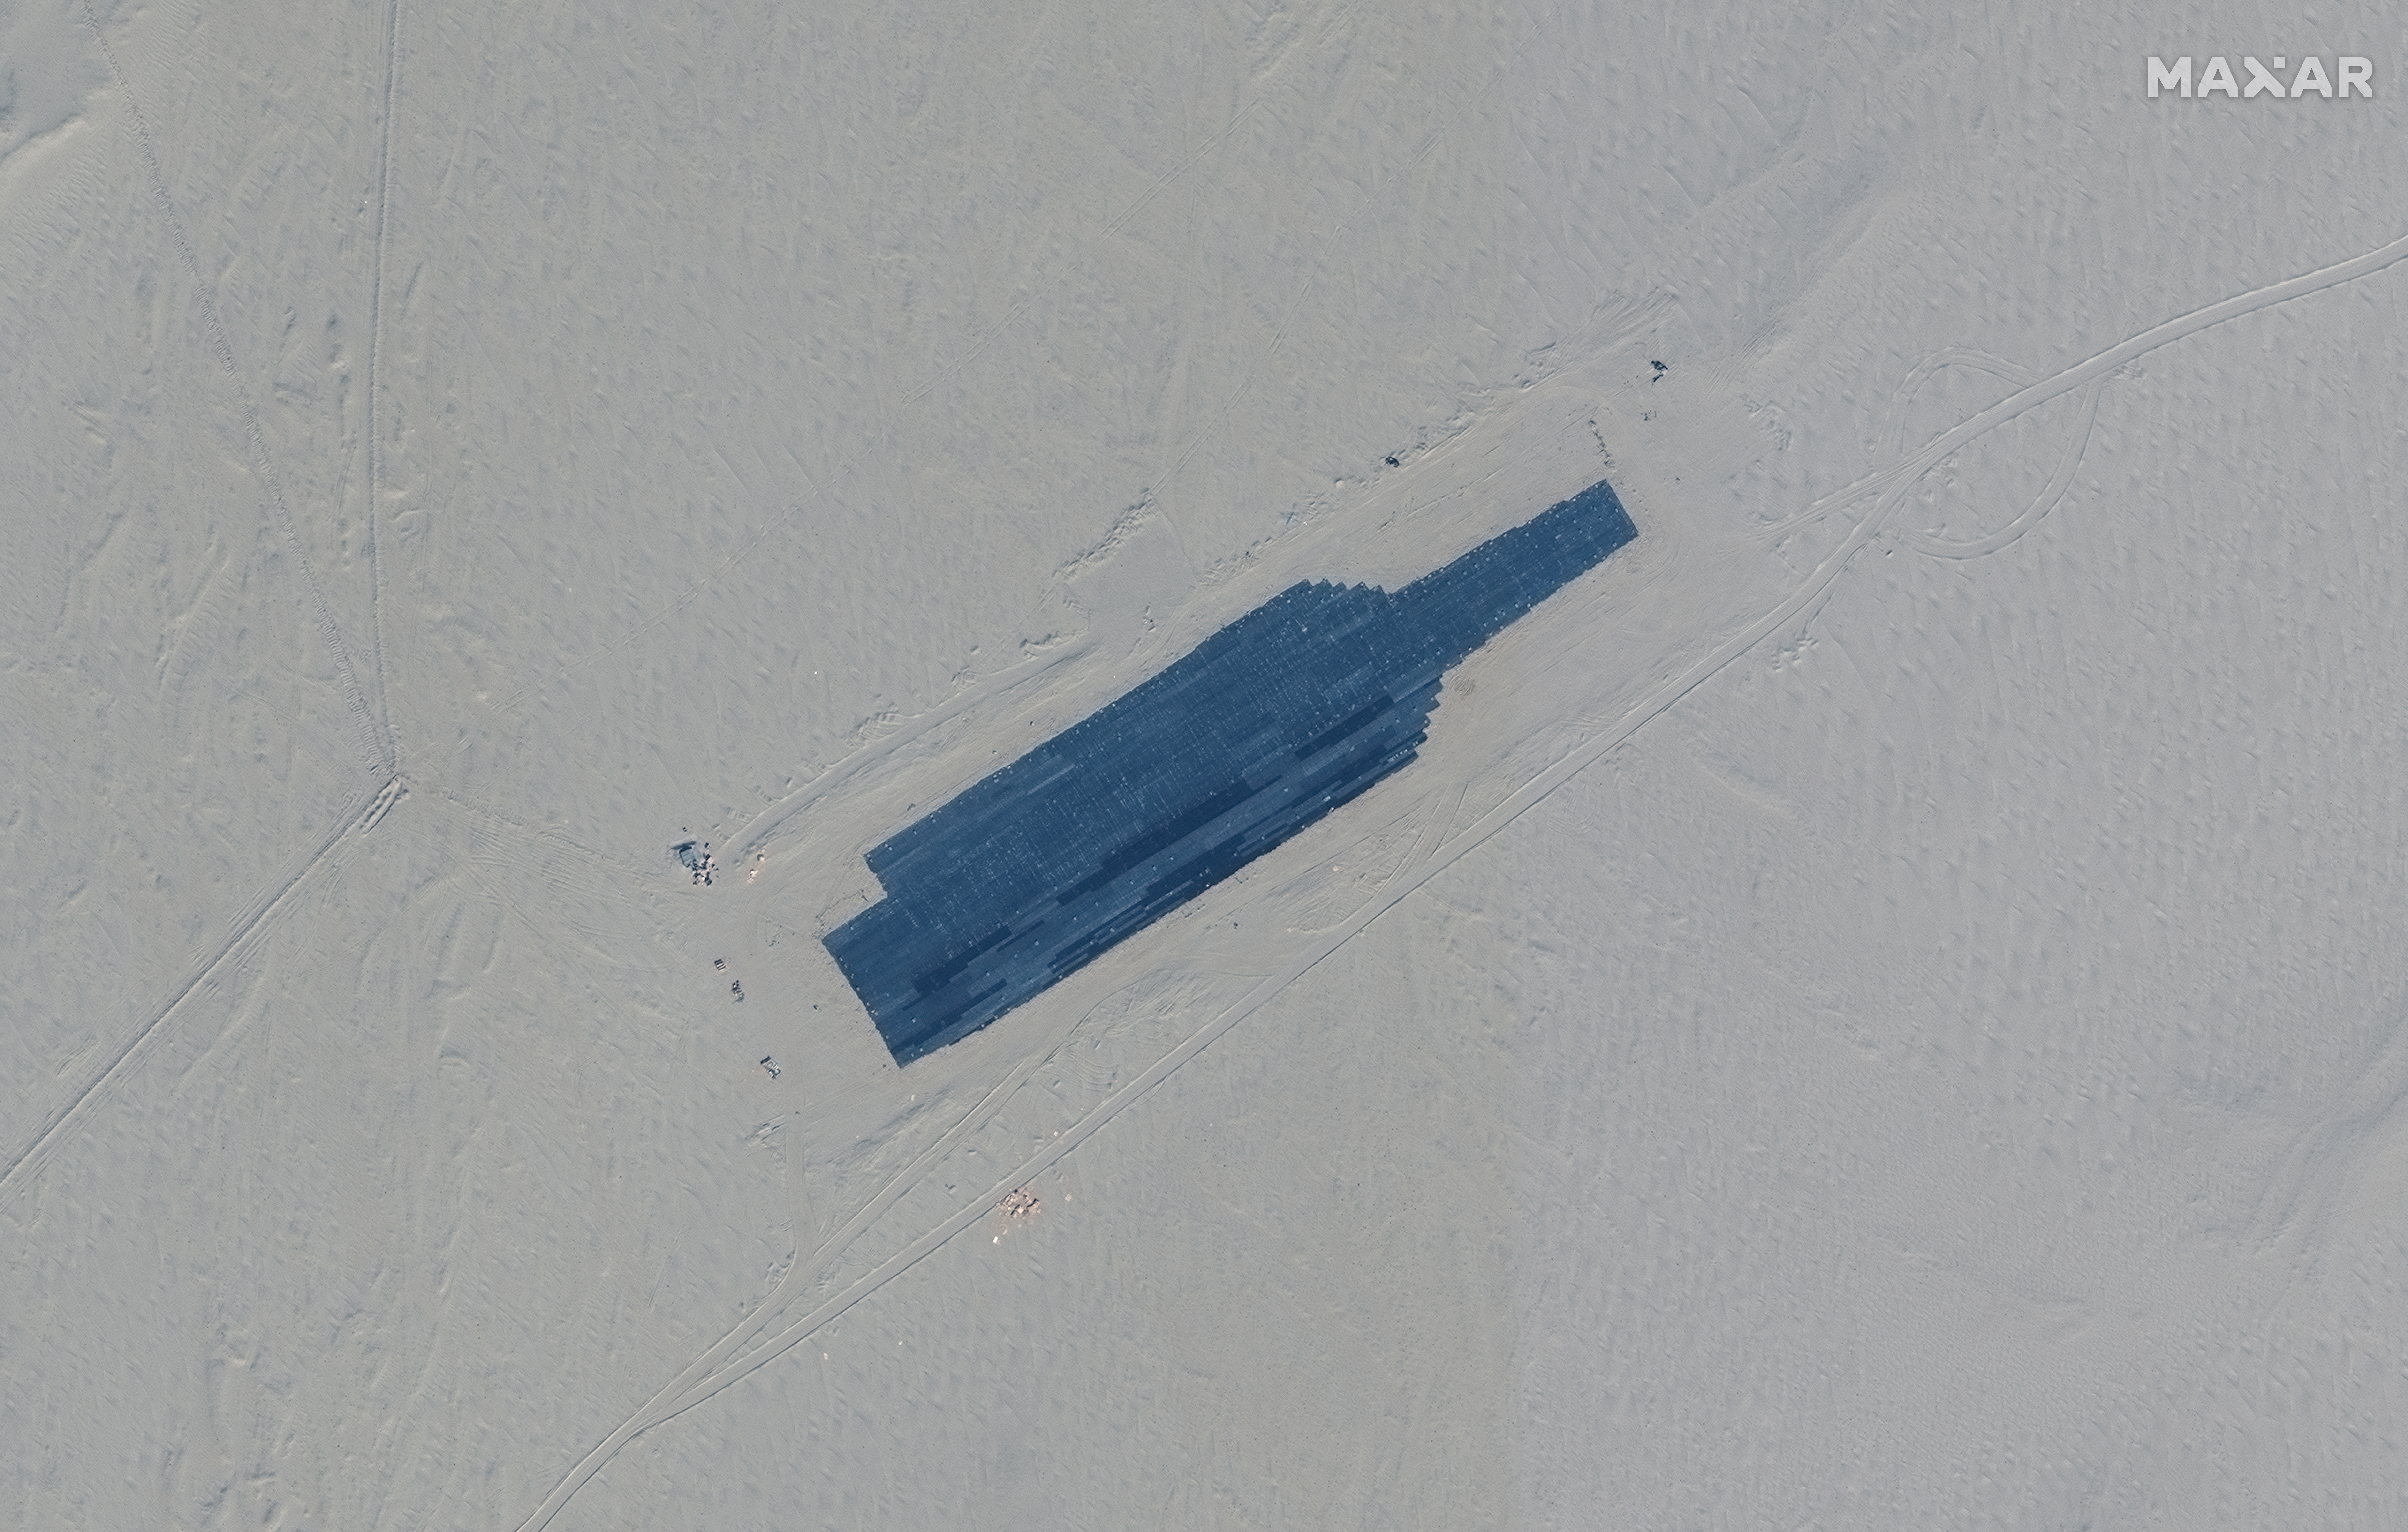 A satellite picture shows a carrier target in Ruoqiang, Xinjiang, China, October 20, 2021. Satellite Image ©2021 Maxar Technologies/Handout via REUTERS